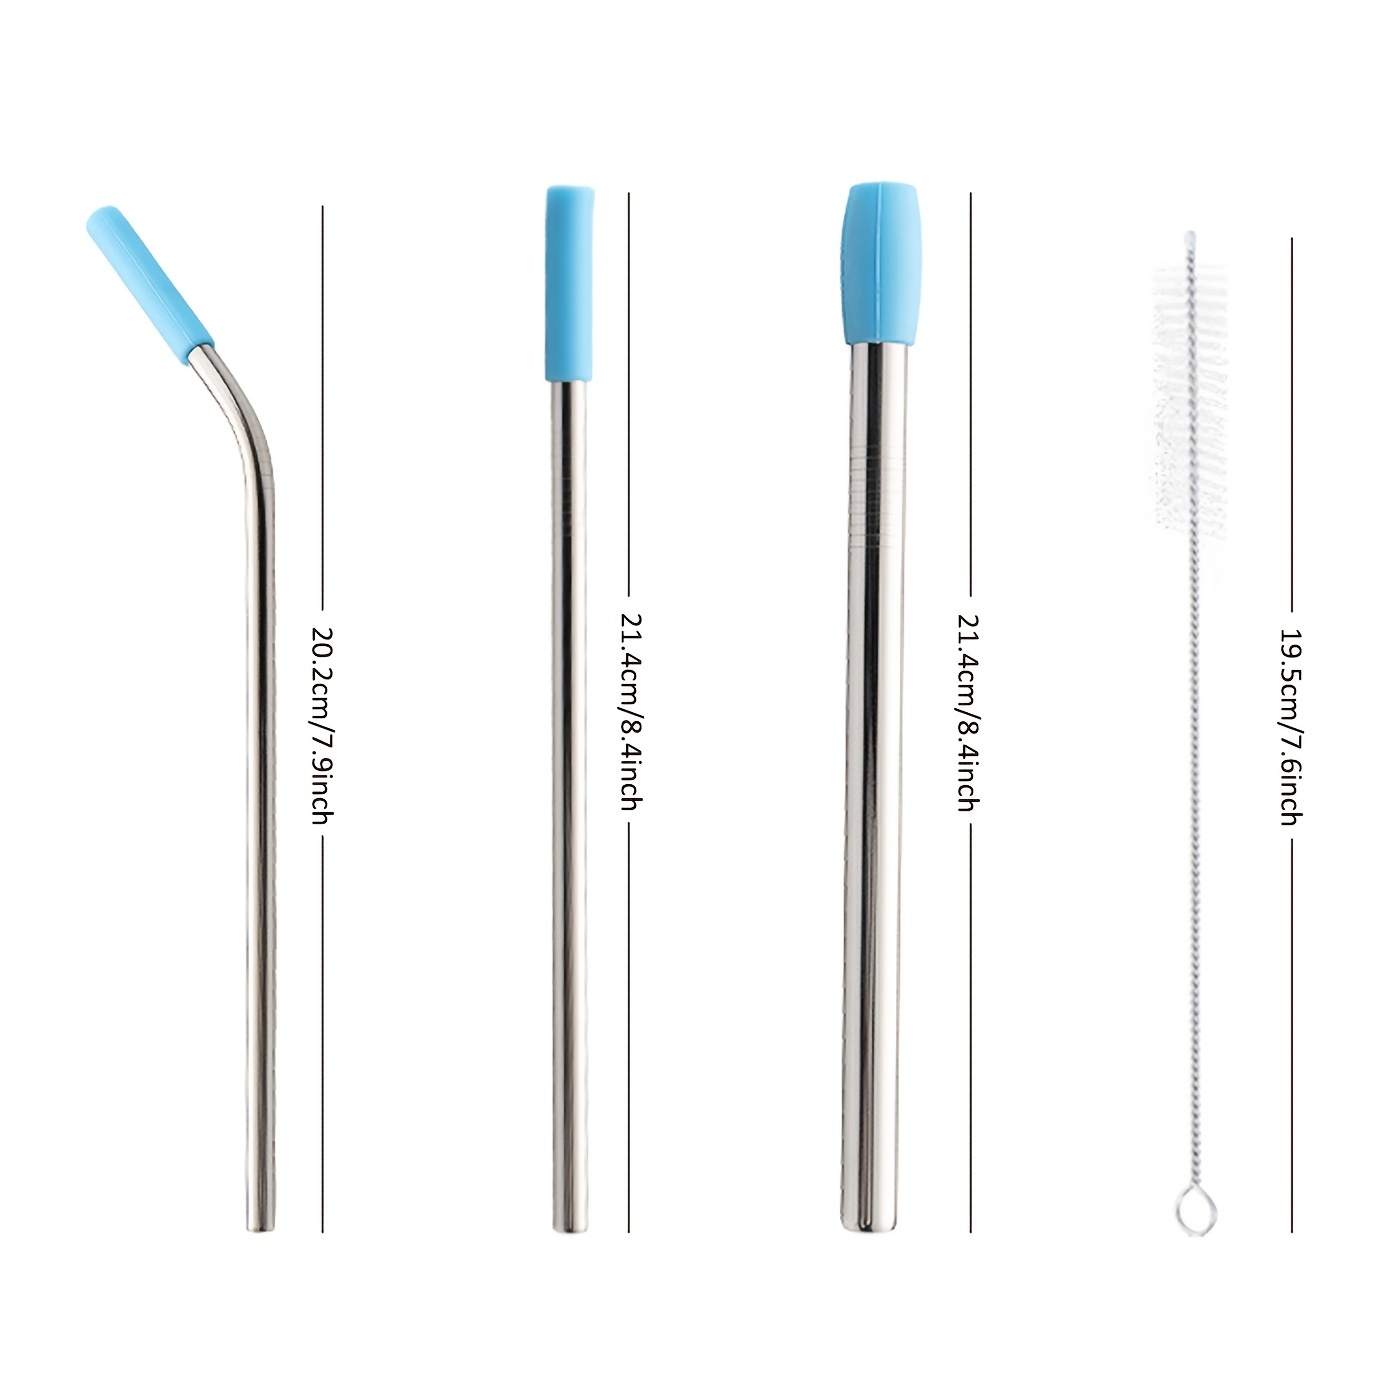  Silicone Tips for Stainless Steel Straws